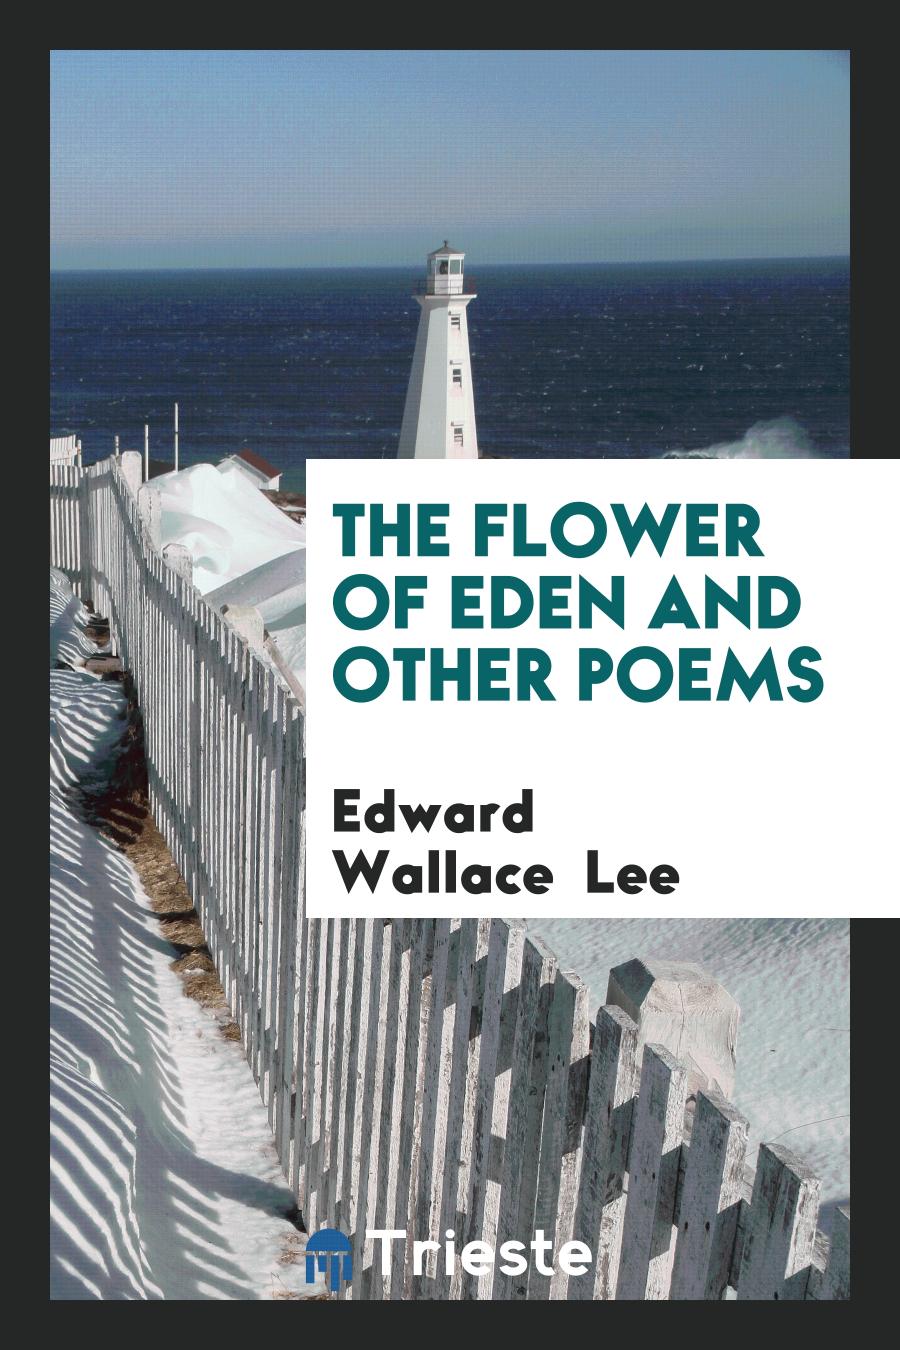 The Flower of Eden and Other Poems